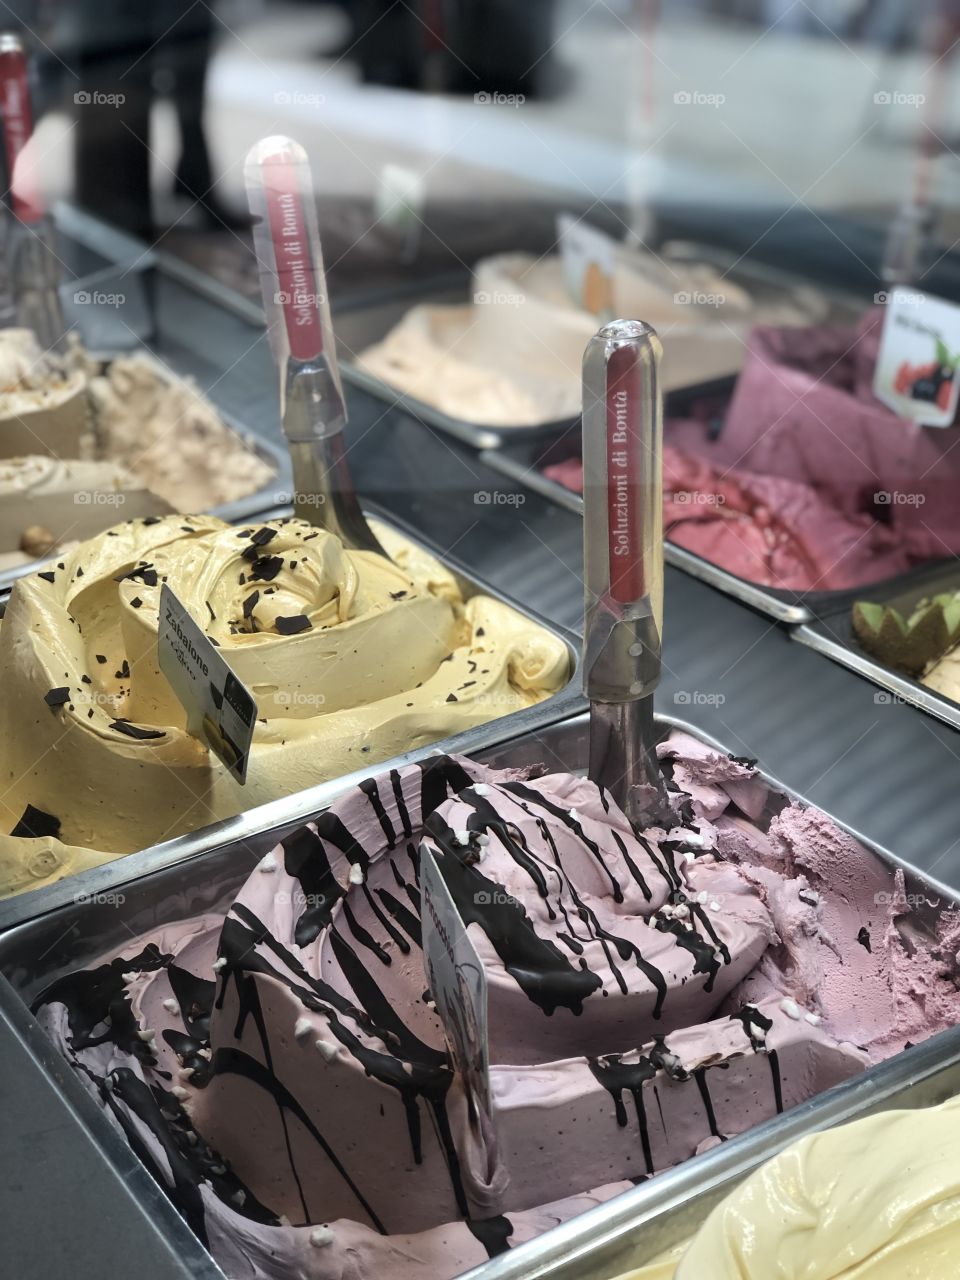 This is artisan ice cream from a store in the Mall of San Juan, located in Puerto Rico.